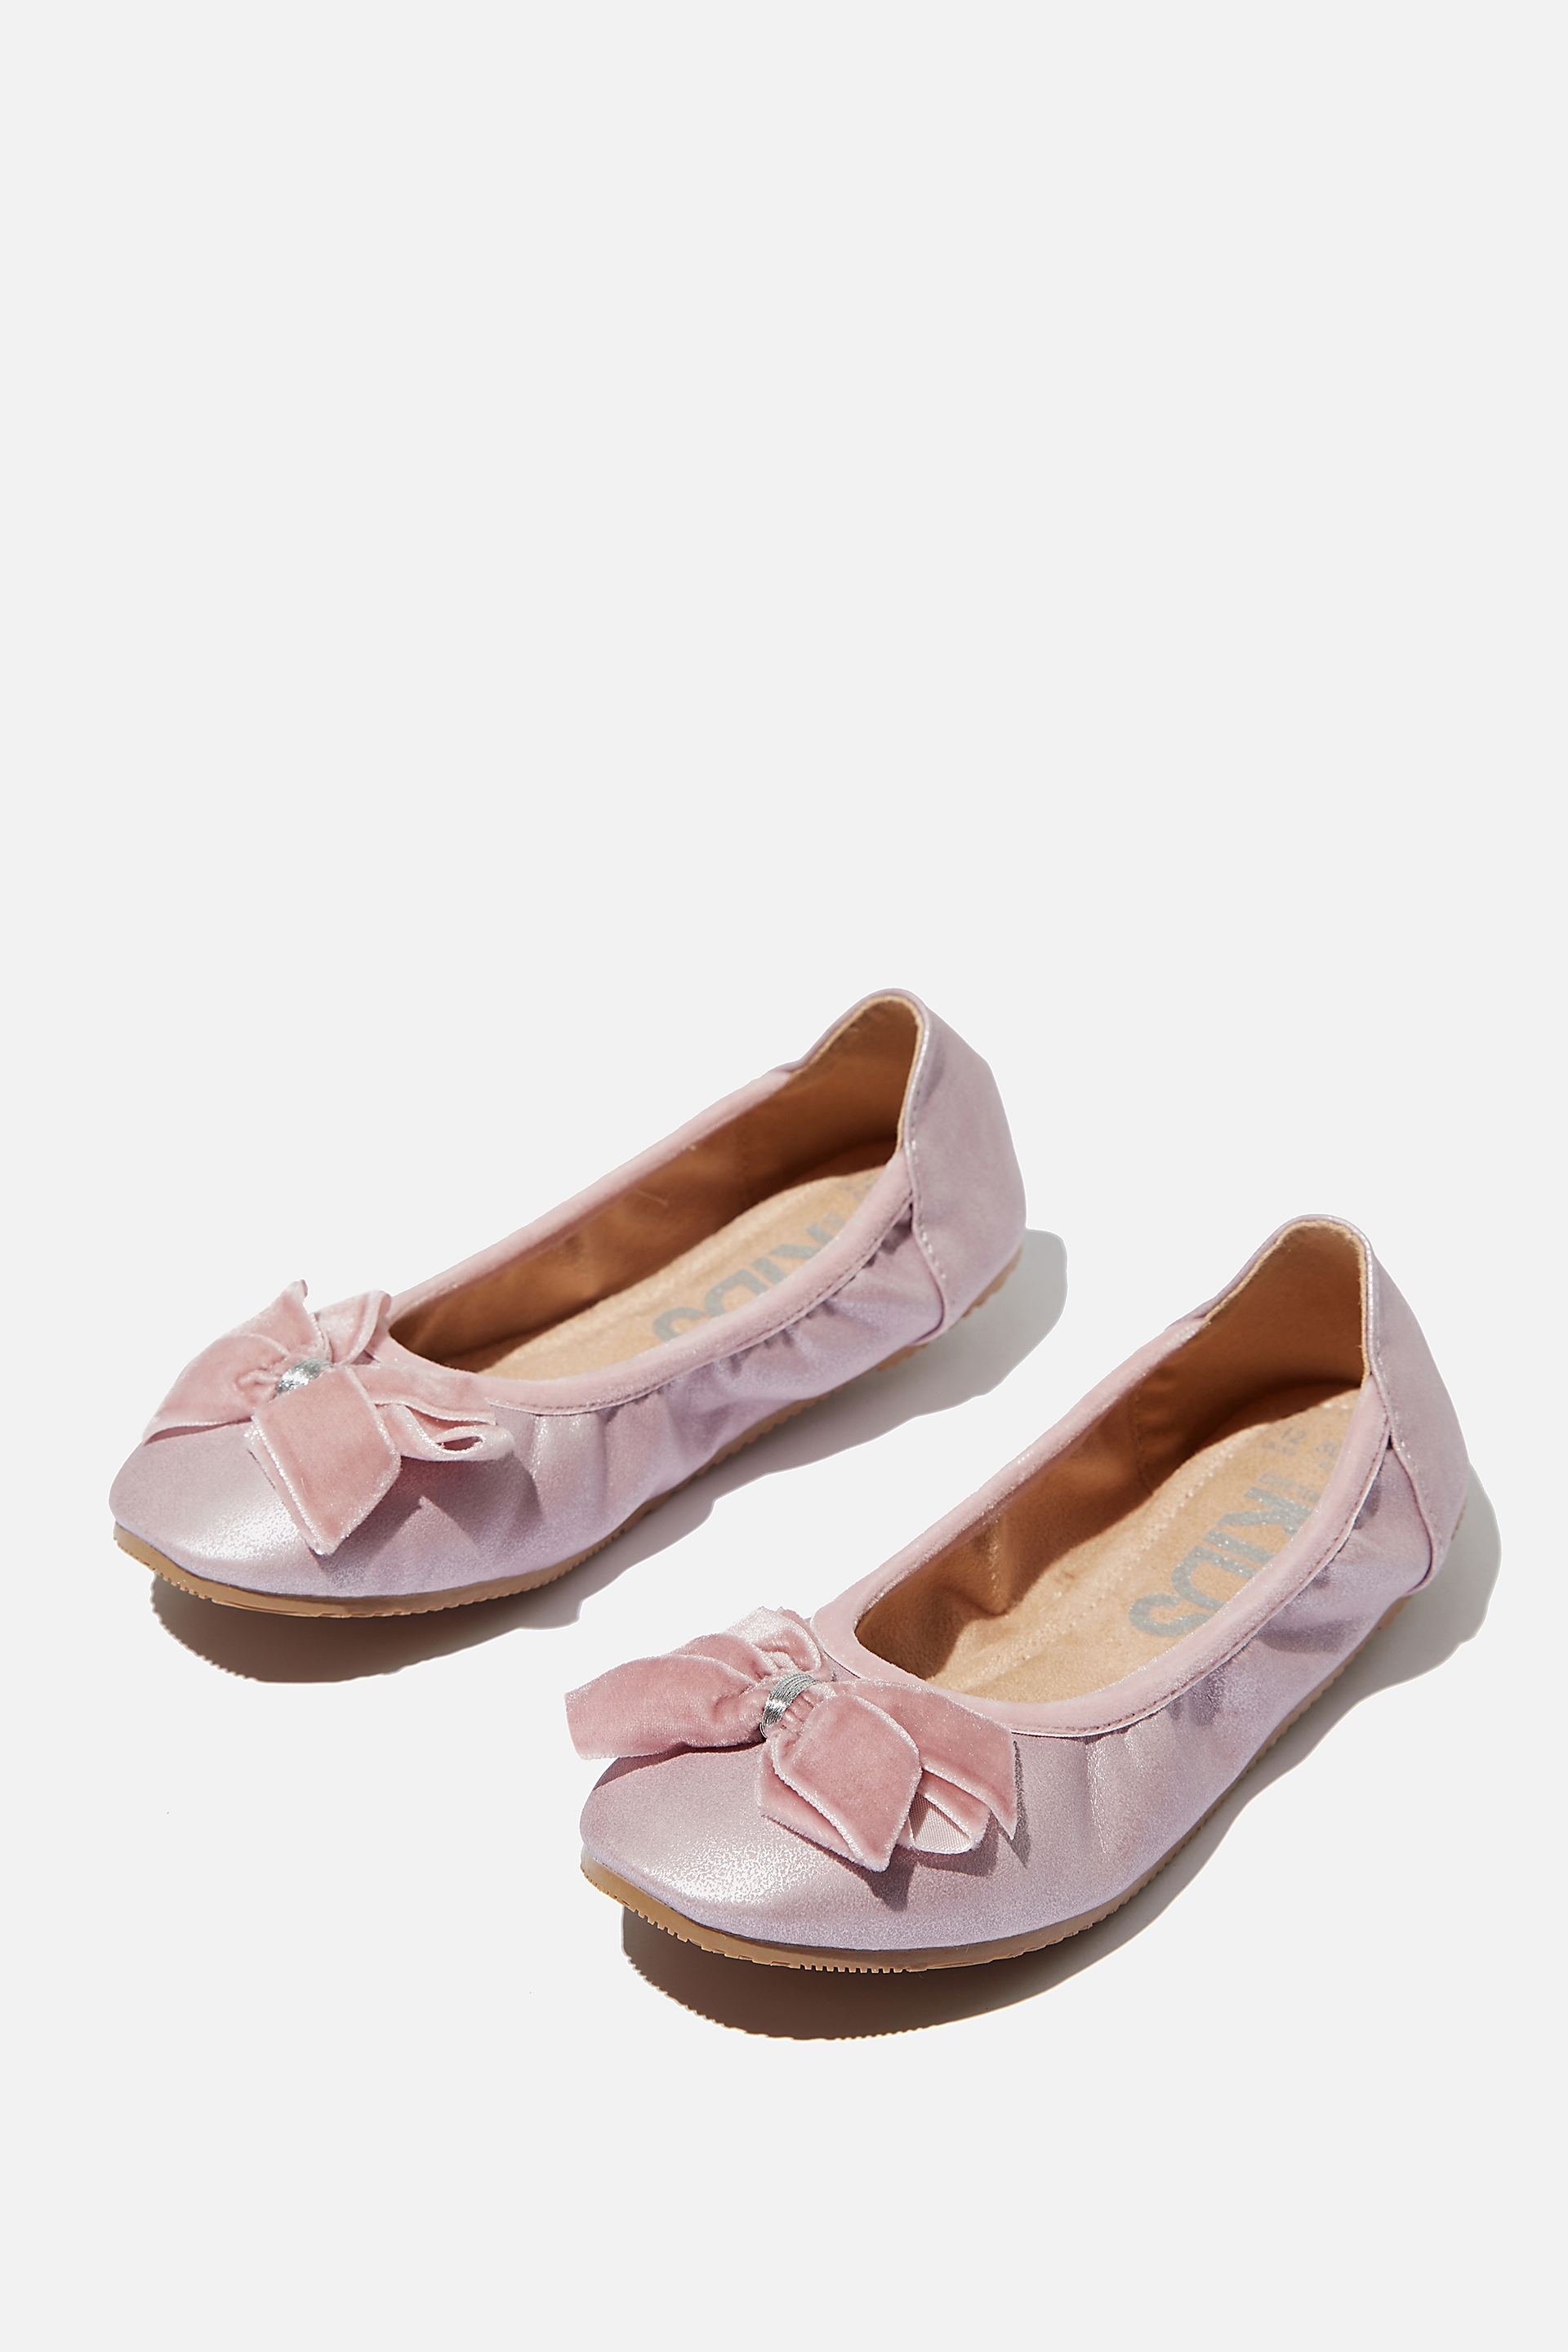 baby pink ballet shoes